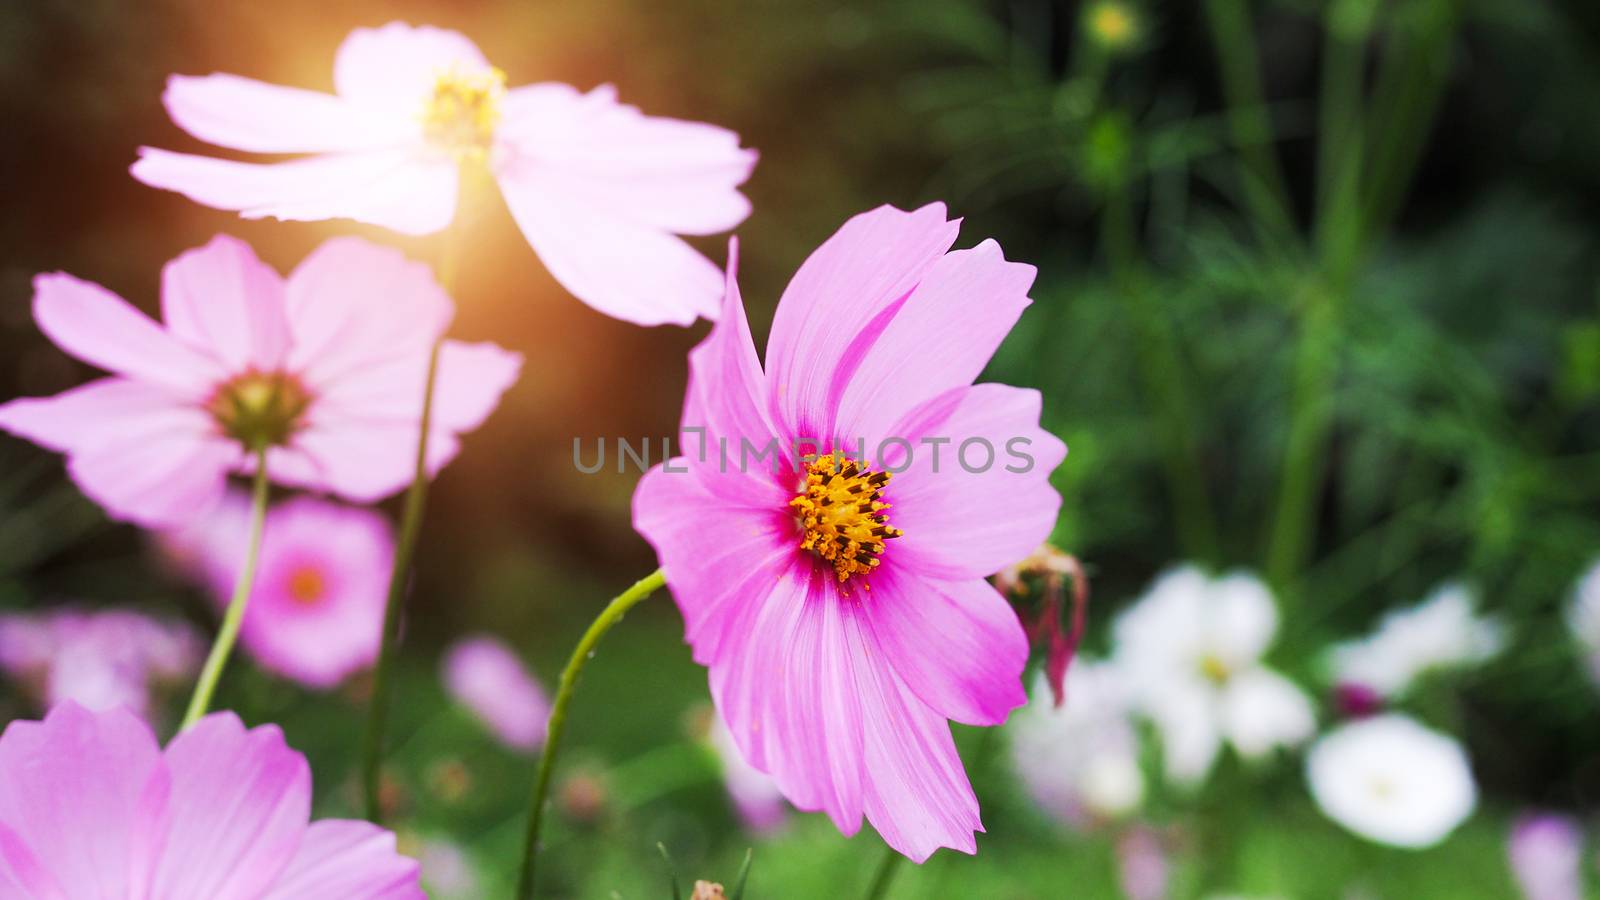 Pink flowers blooming in the garden Cosmos flowers in the park by kittima05